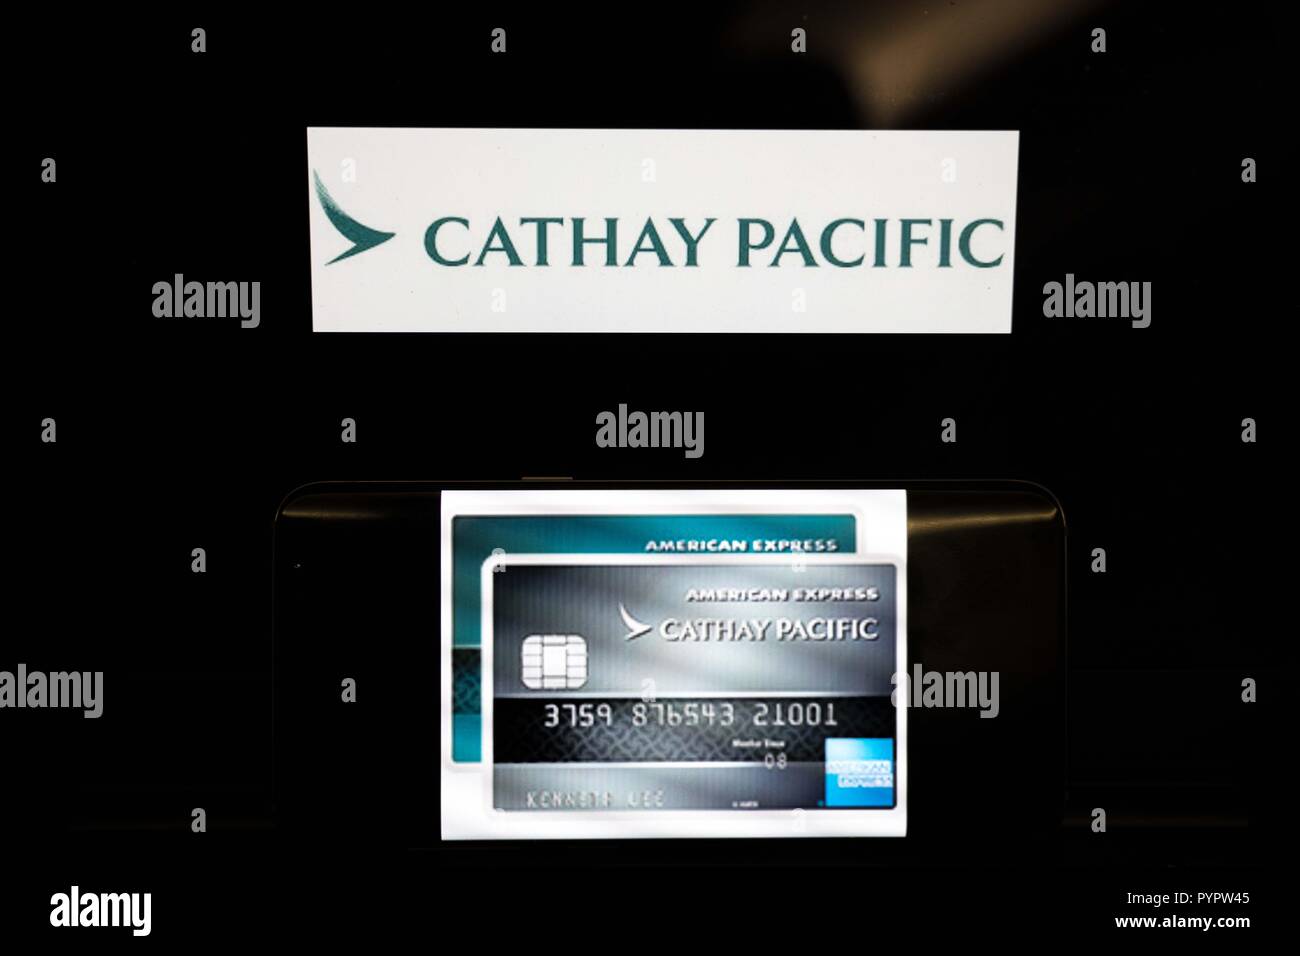 Cathay Pacific credit card displayed on a smartphone in front of a background of the Cathay Pacific logo. The Hong Kong based airline Cathay Pacific has reported that there has been a major data leak happened in march 2018 with data of around 9.4 million passengers was compromised during the breach, with 860,000 passport numbers, 245,000 Hong Kong identity card numbers, 403 expired credit card numbers and 27 credit card numbers without CVV being accessed. Stock Photo